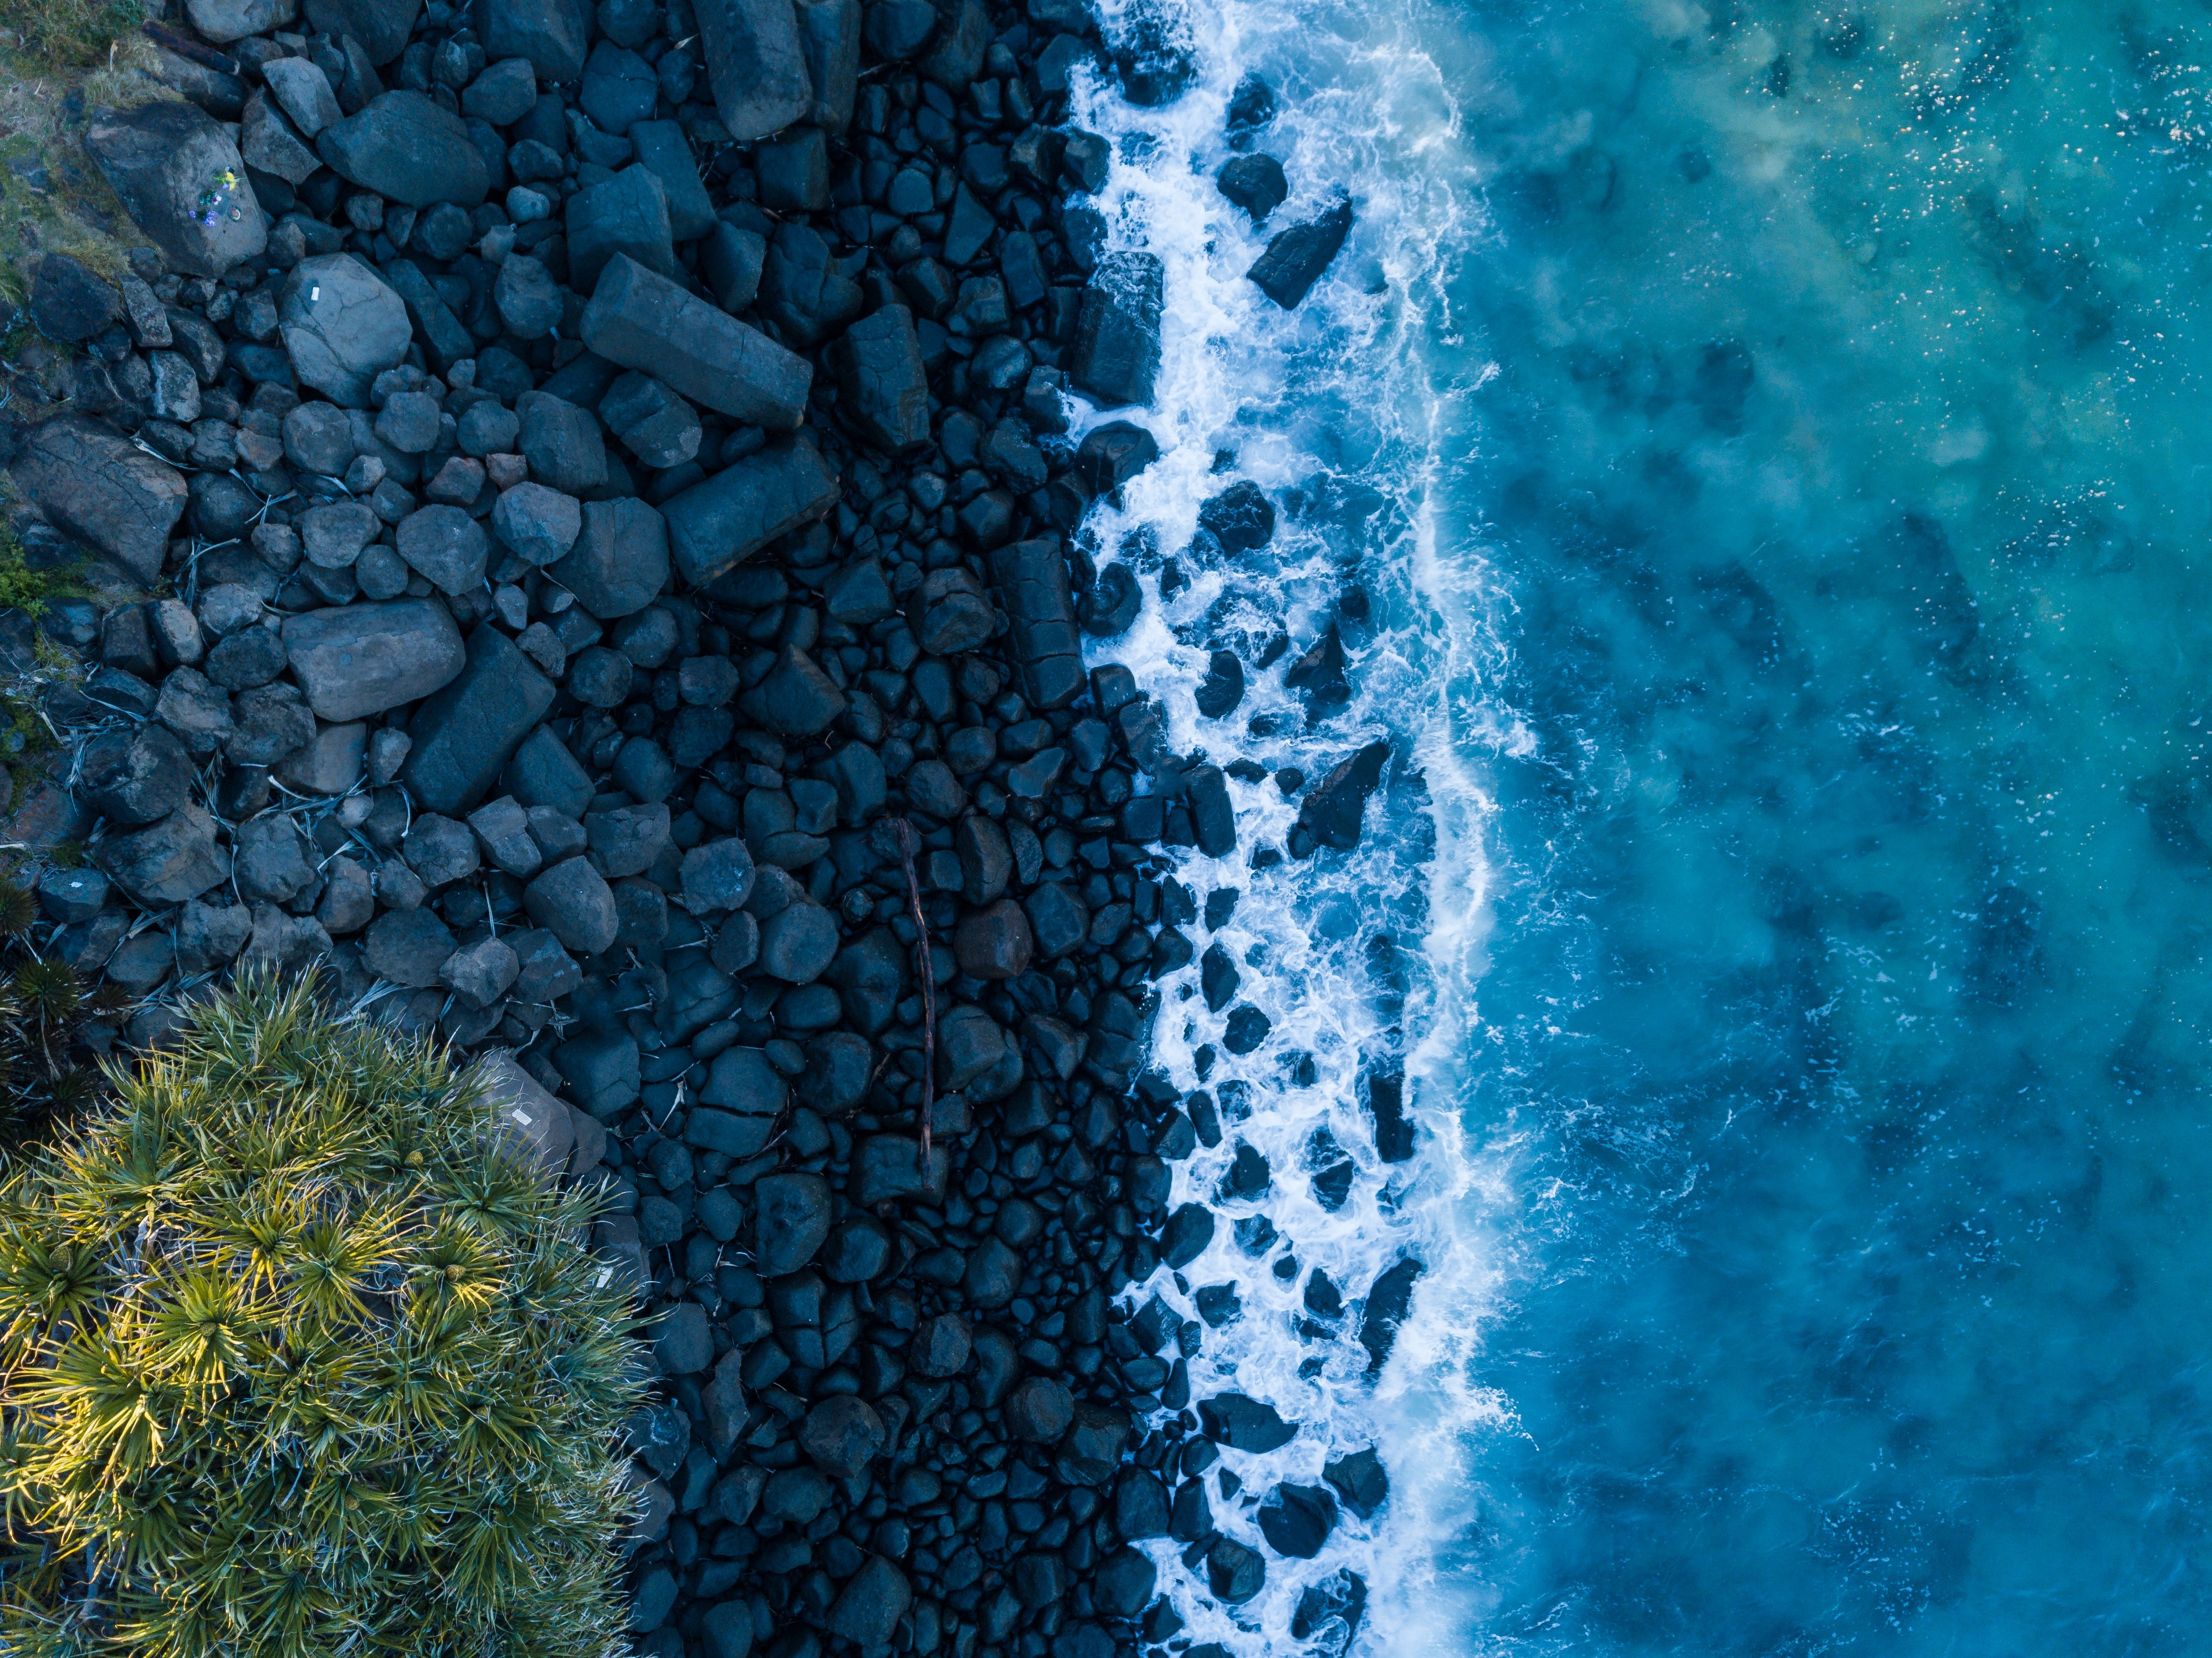 view from above, nature, stones, shore, bank, ocean, surf